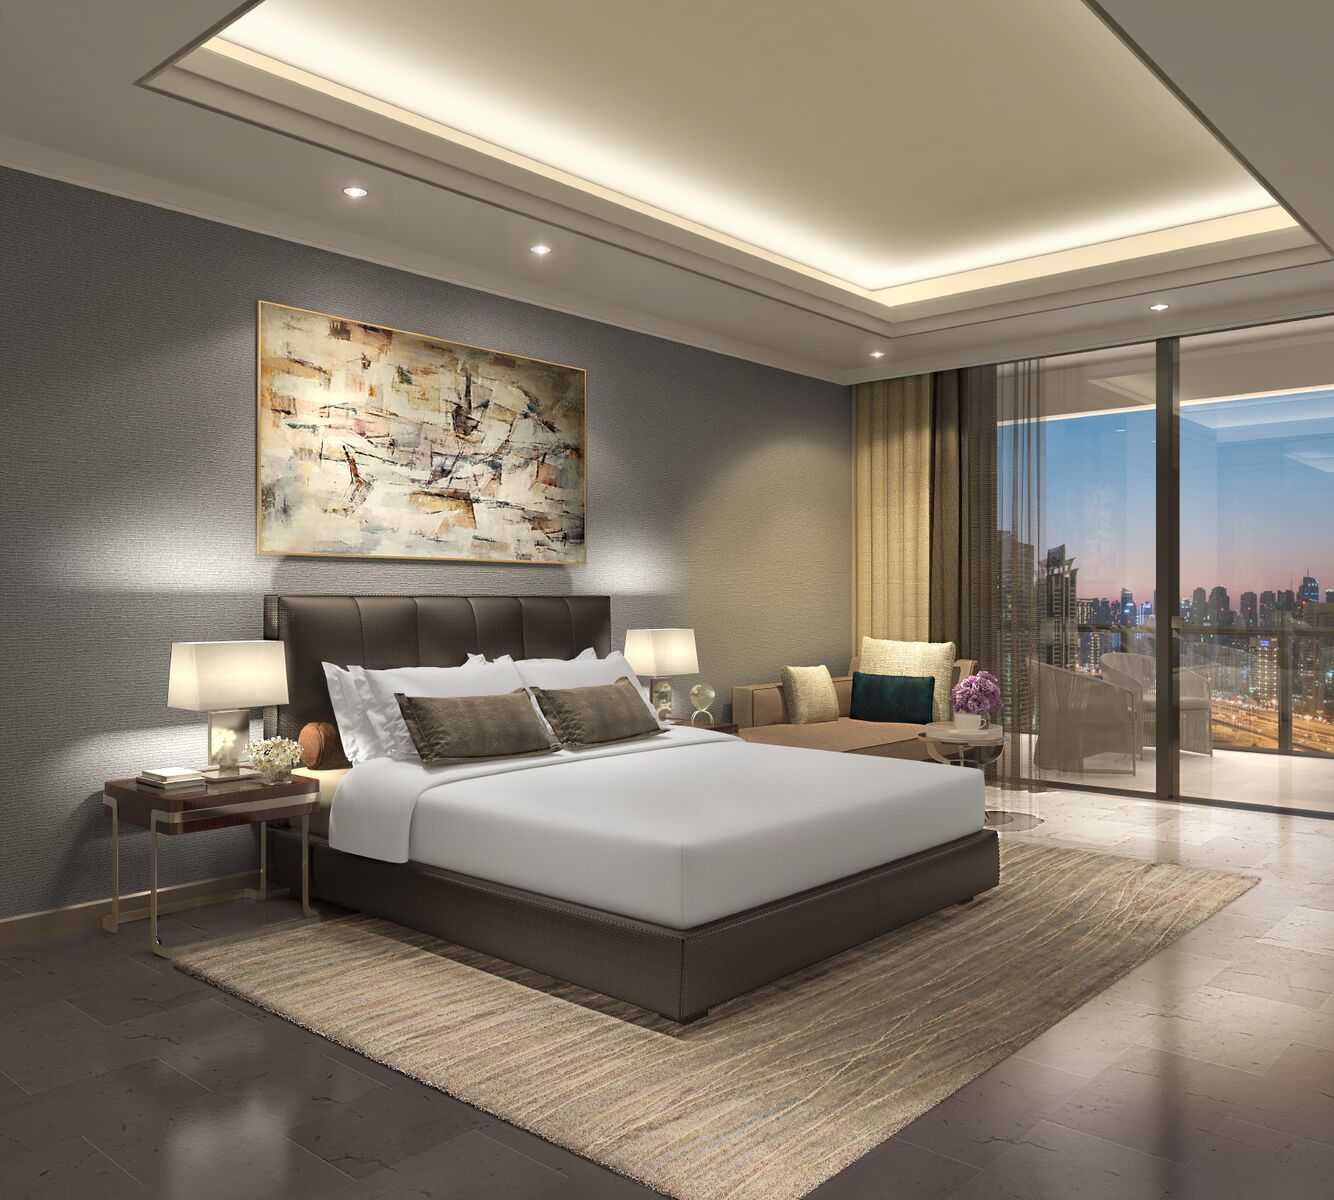 The Residences By Signature Developers Scheduled For Completion